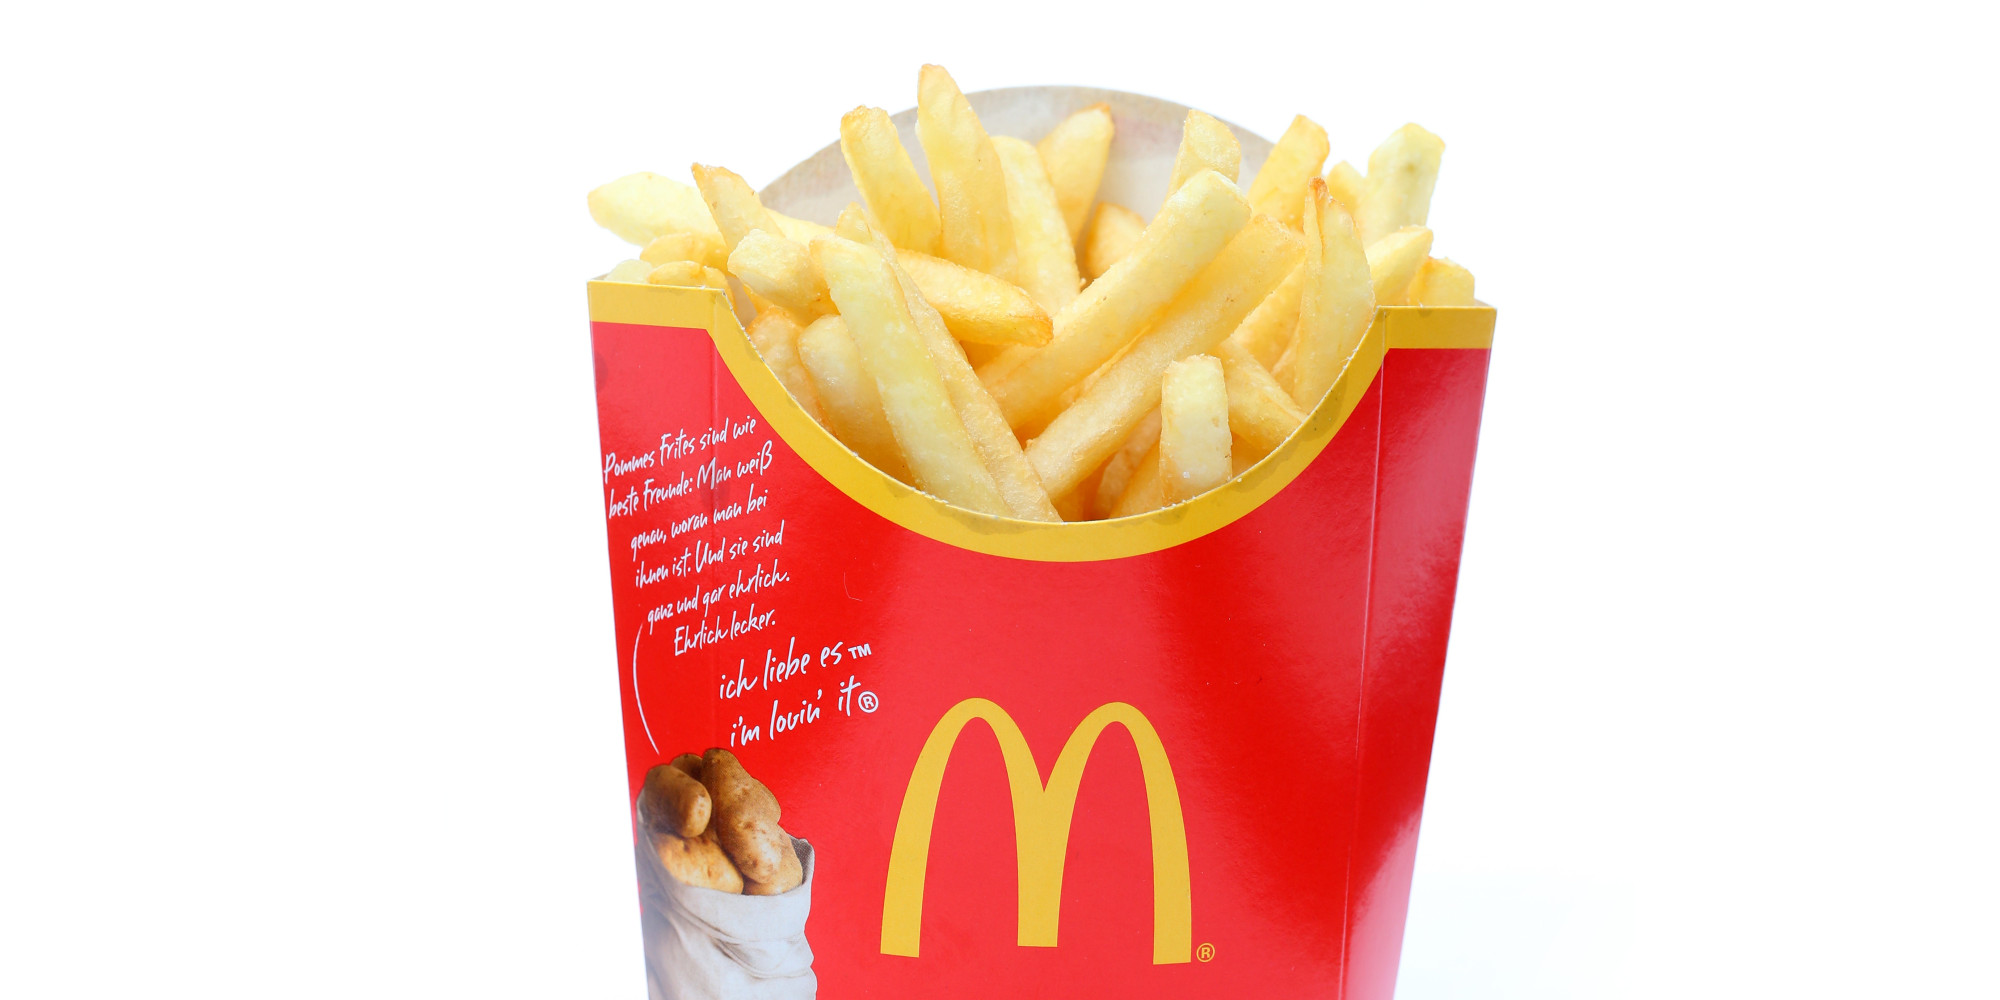 How To Make Delicious McDonald's Fries At Home | HuffPost